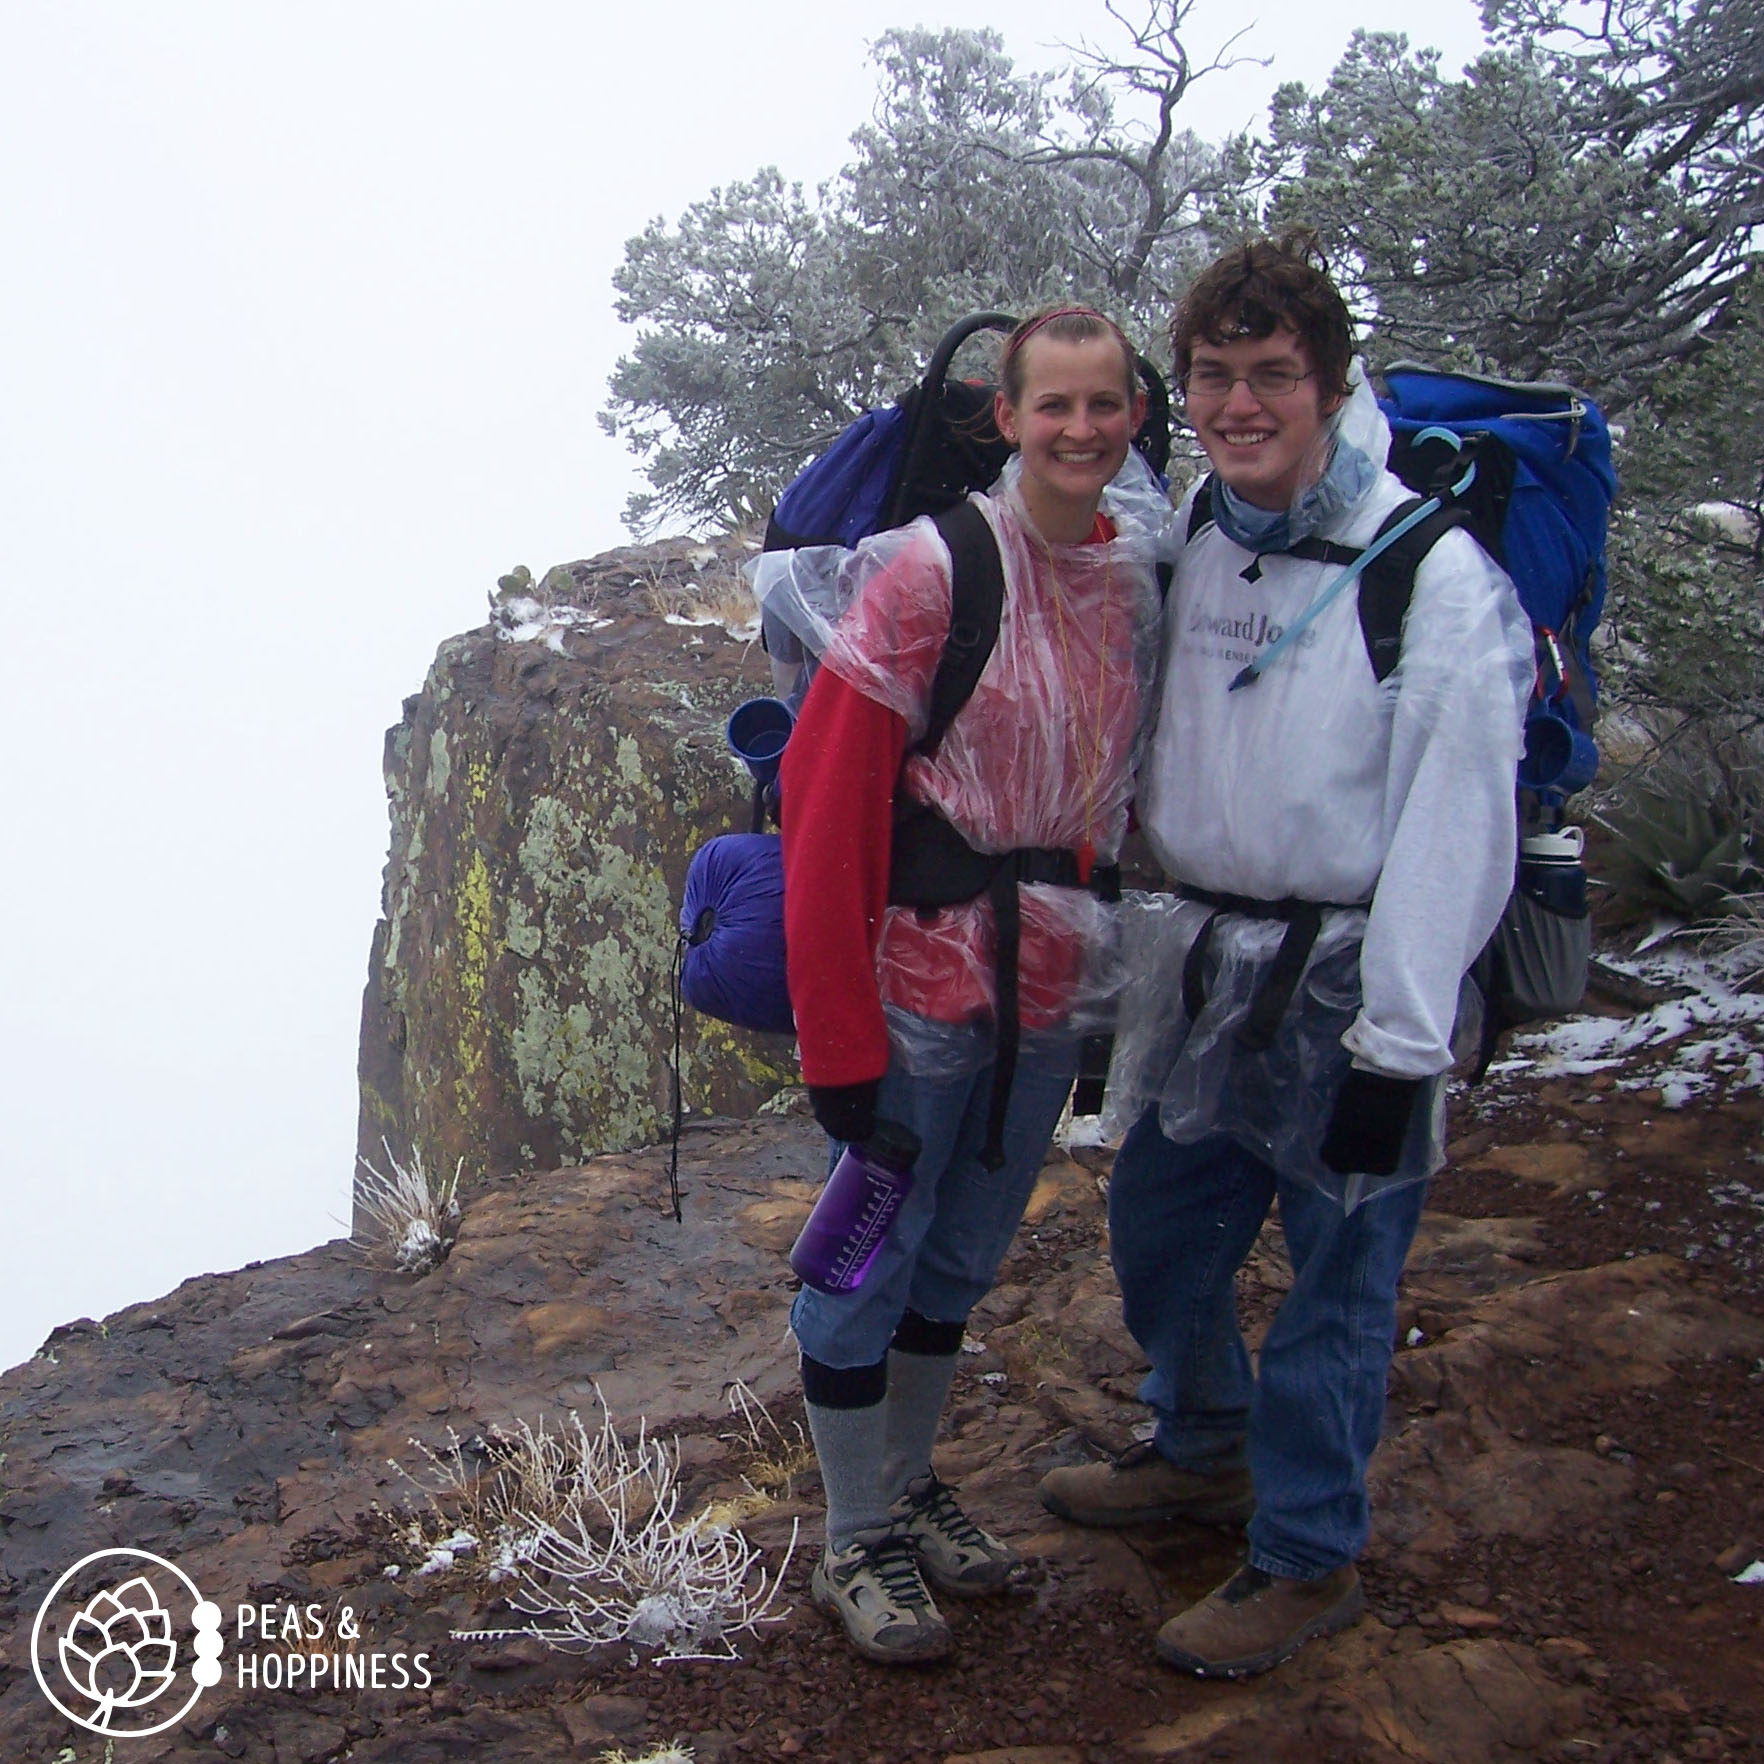 Young Ann and Deric - not their first backpacking trip, but before learning to bring more clothes than you'll think you need (it snowed unexpectedly) and prior to purchasing modern-day internal-framed backpacks. But they lived! Big Bend National Park